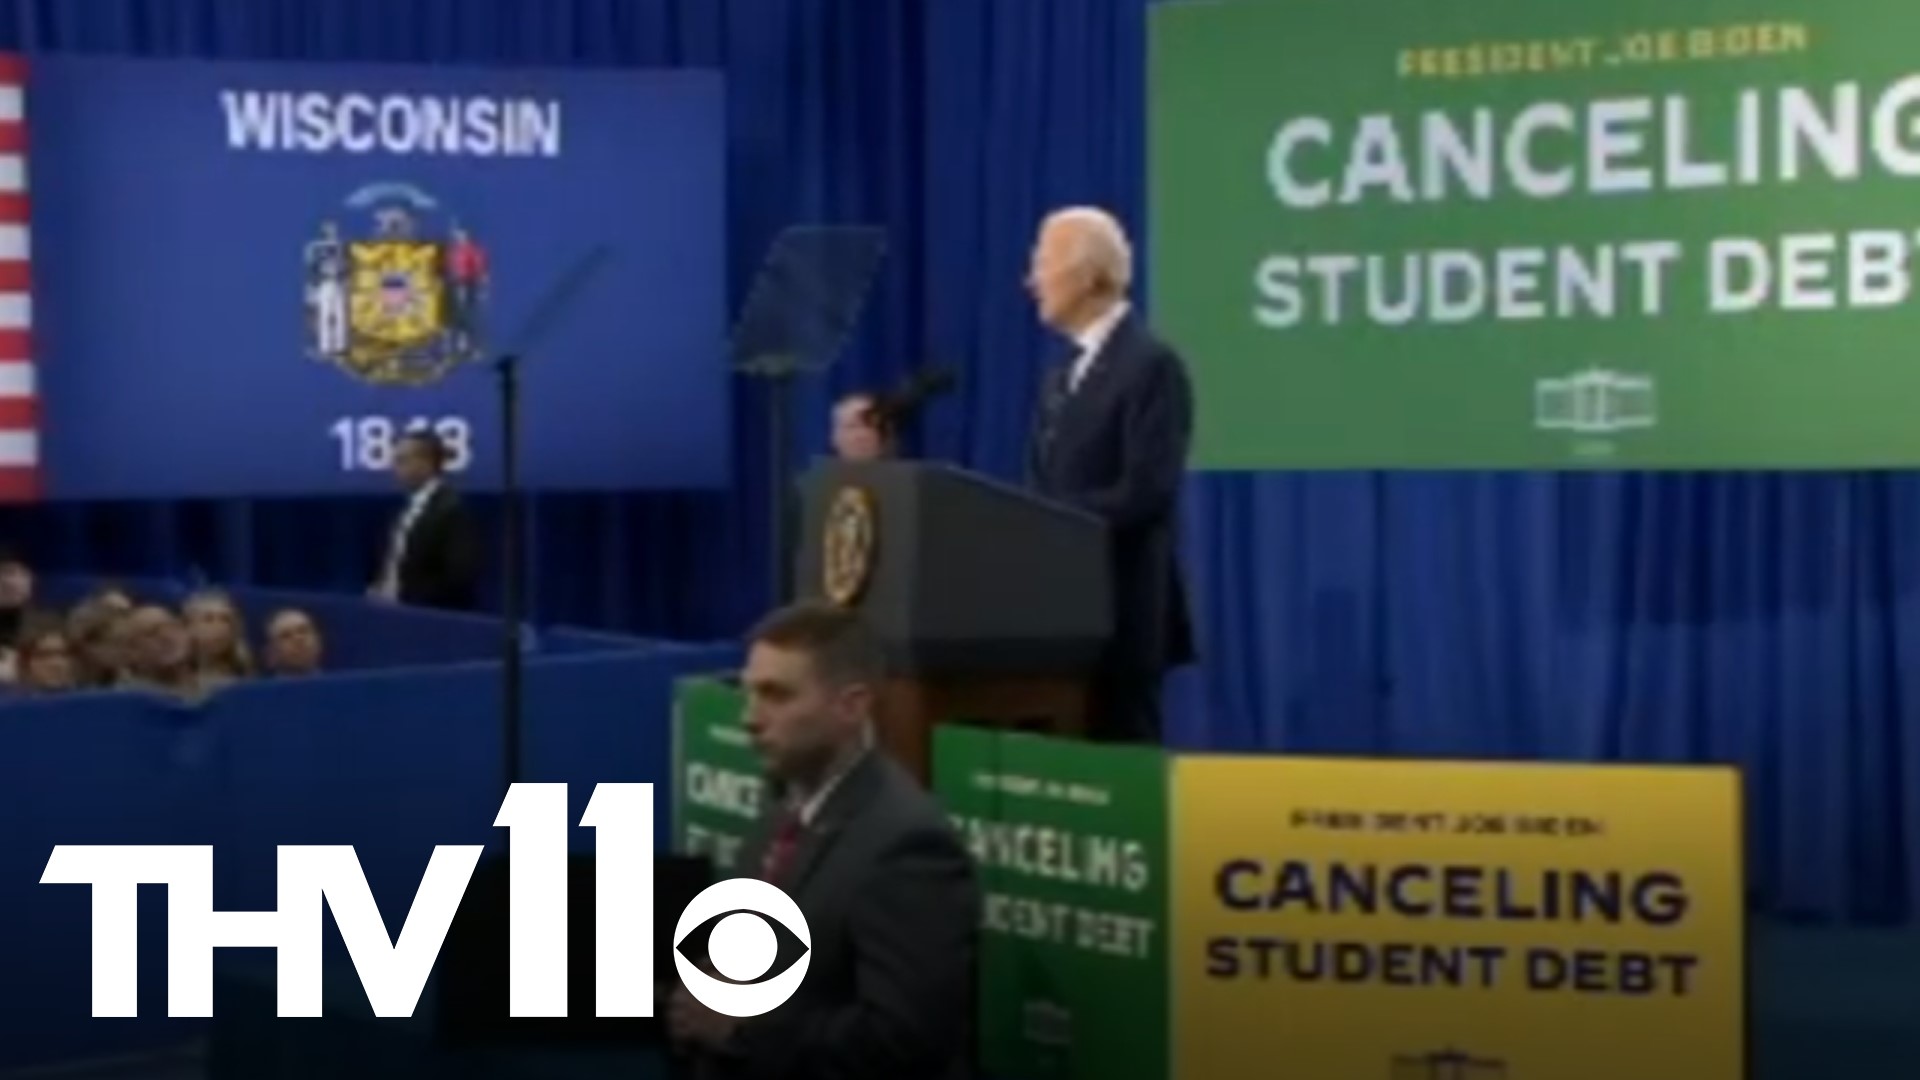 On Monday, President Biden unveiled his new plan to cancel thousands of dollars worth of student debt.